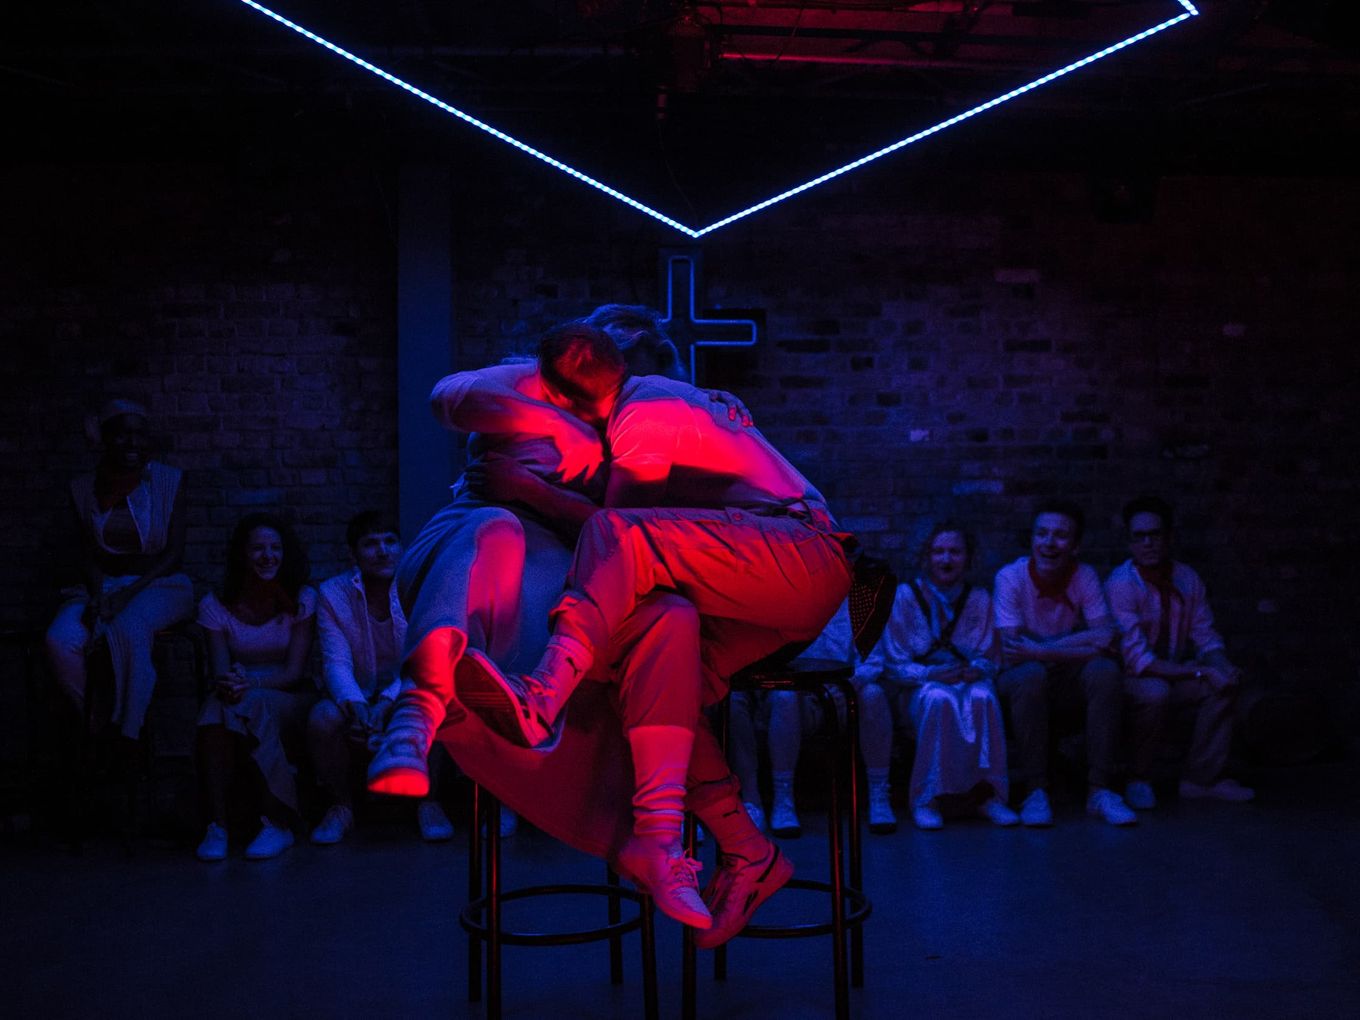 Two people embrace on bar stools in intense magenta light against a dim blue wash.